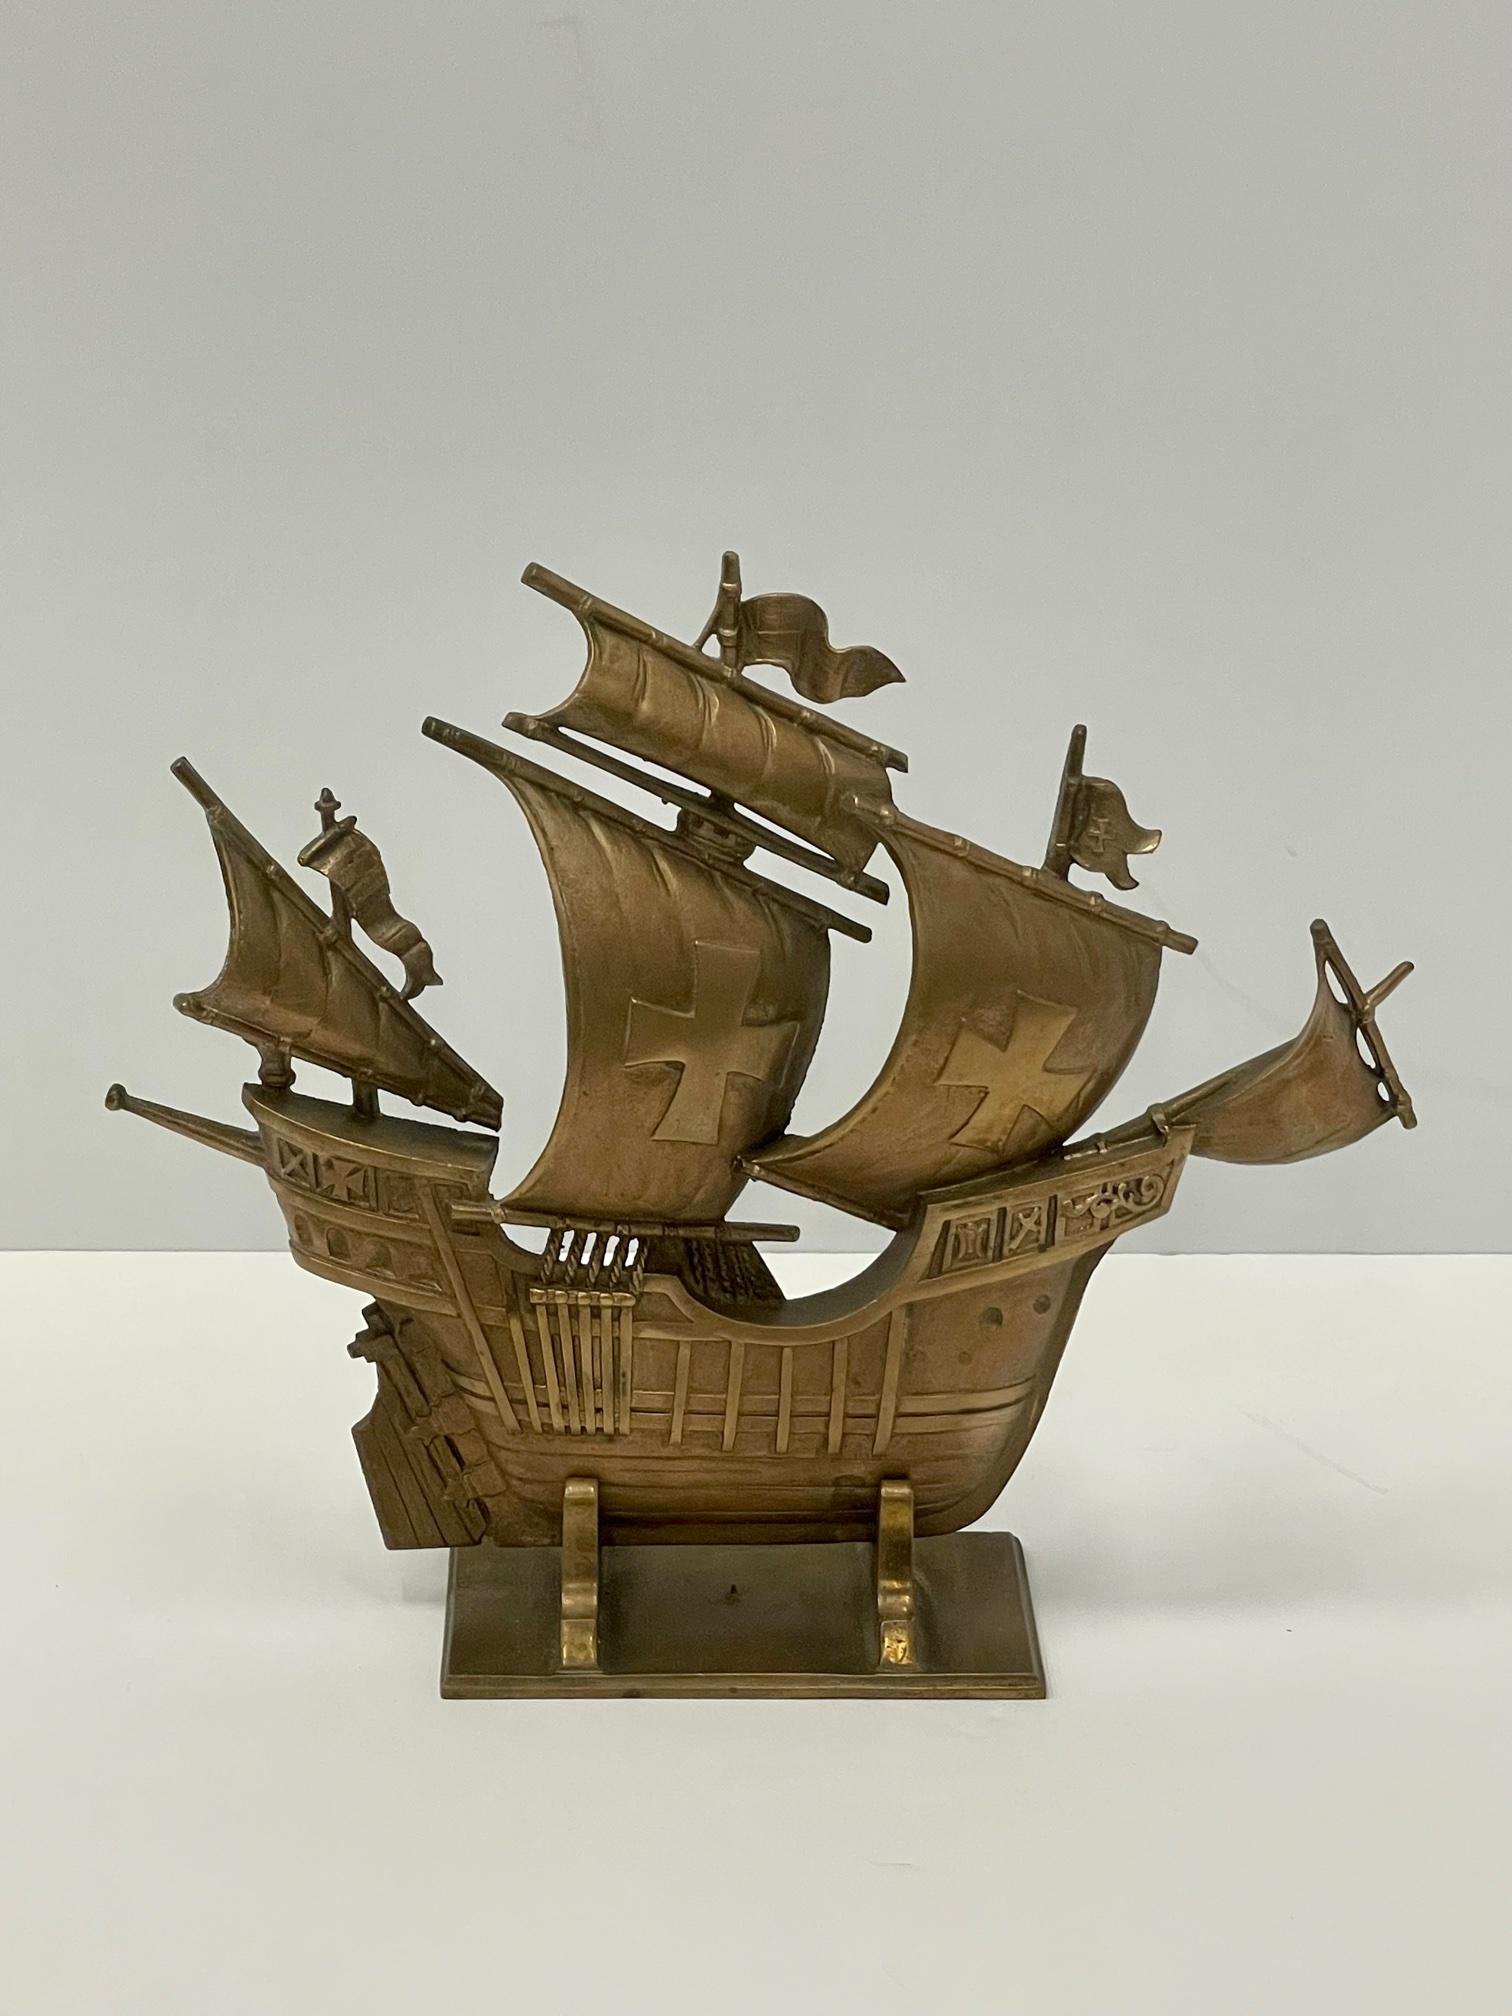 Wonderful decorative vintage cast brass doorstop, sculptural and masculine, in the shape of a Spanish Galleon.